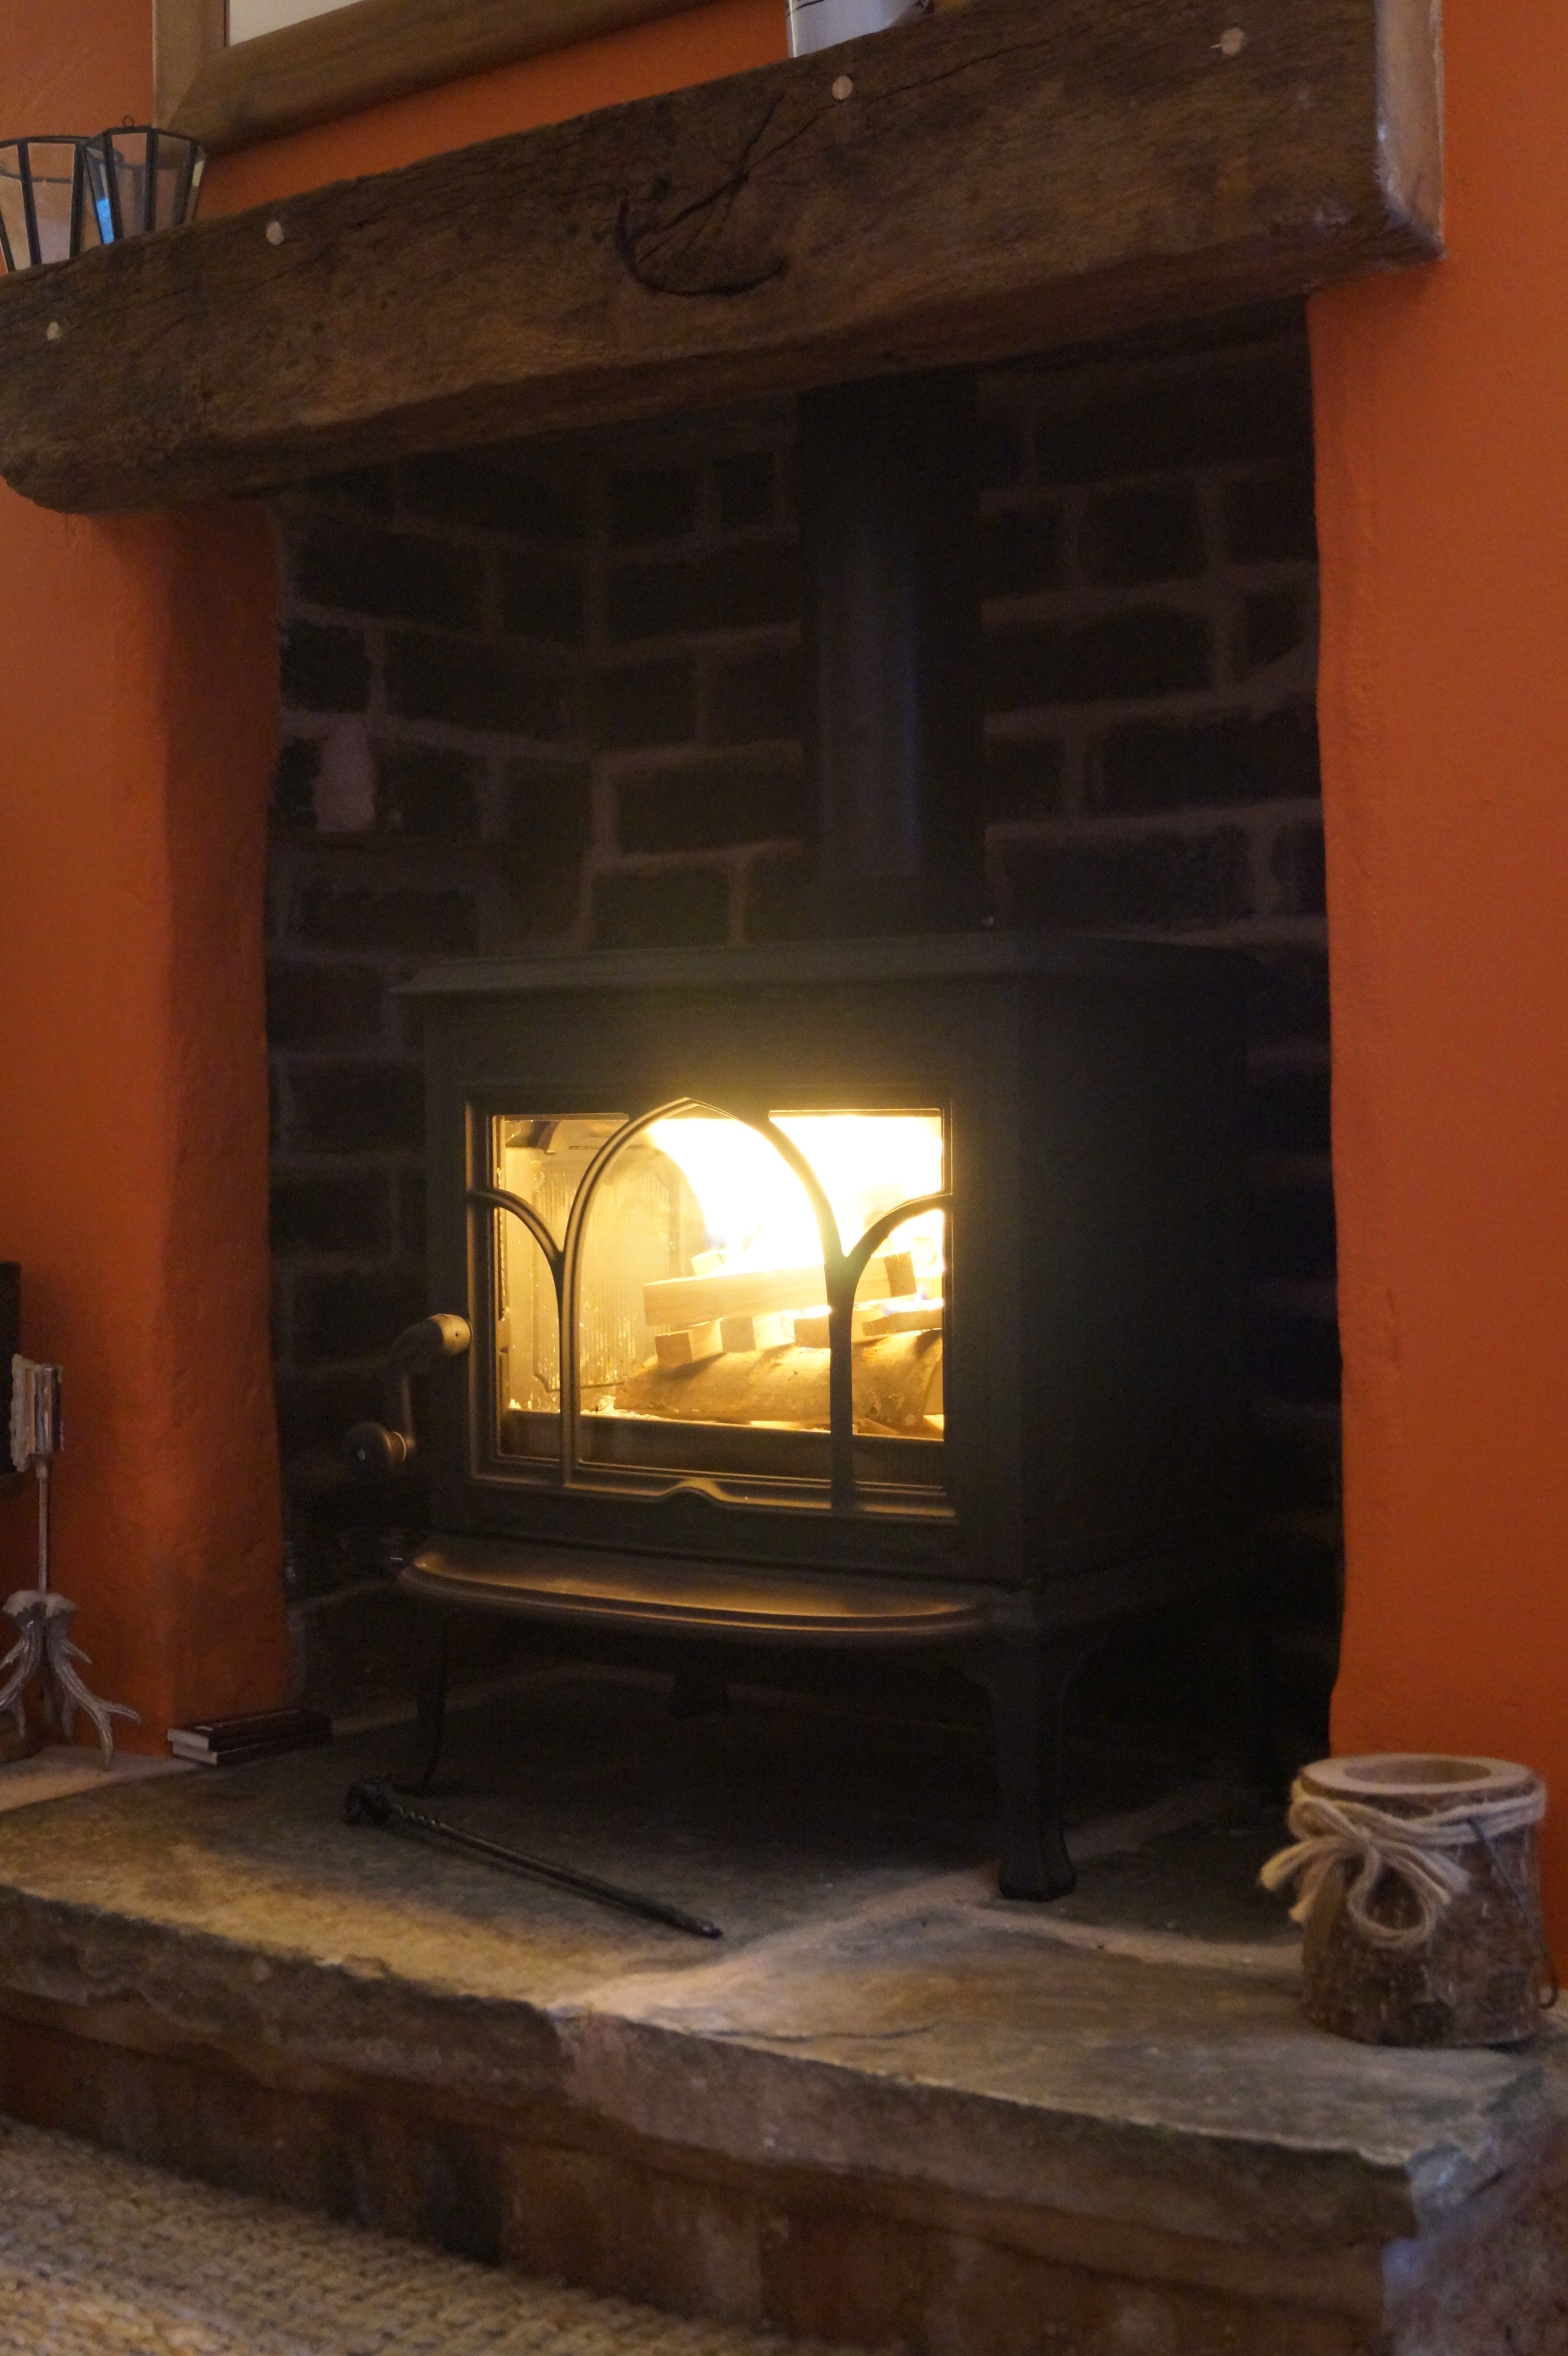 Install Wood Stove In Fireplace Lovely Our norwegian Jotul F100 Wood Burning Stove Recently